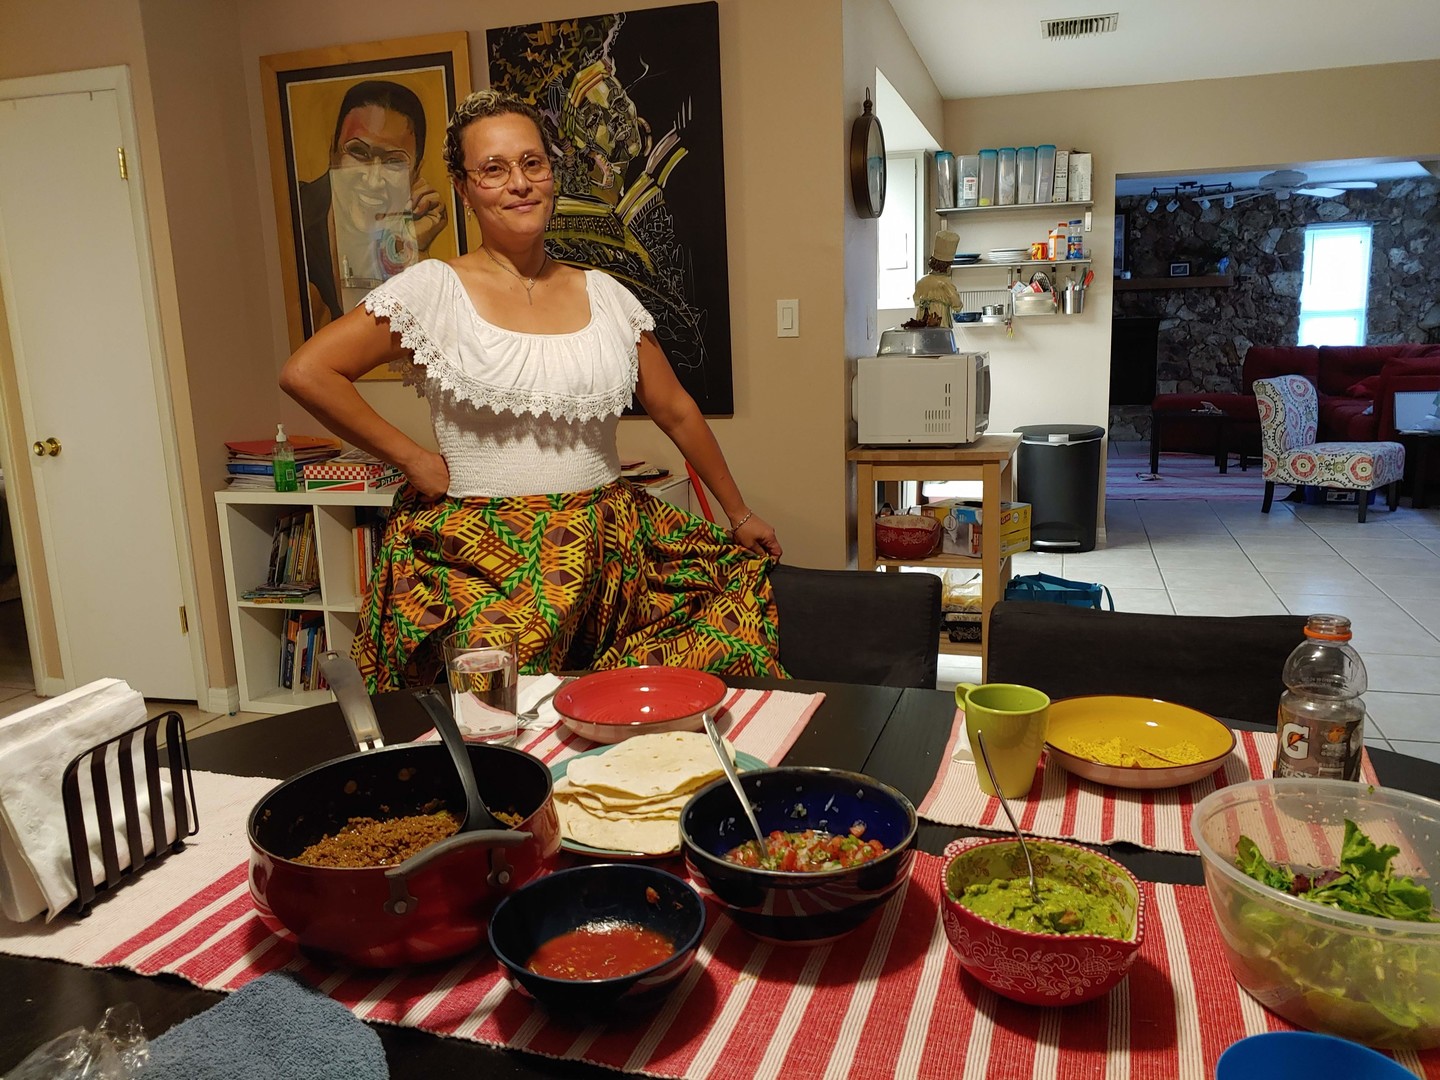 An olive-skinned woman wearing traditional Puerto Rican dress--a white blouse with lace neck and brightly patterned skirt--stands smiling in front of a set dinner table that features various bowls and pots of ground beef, salsa, sauce, guacamole, and salad. Behind her there is framed art on the walls, a microwave, furniture, and other household decor.